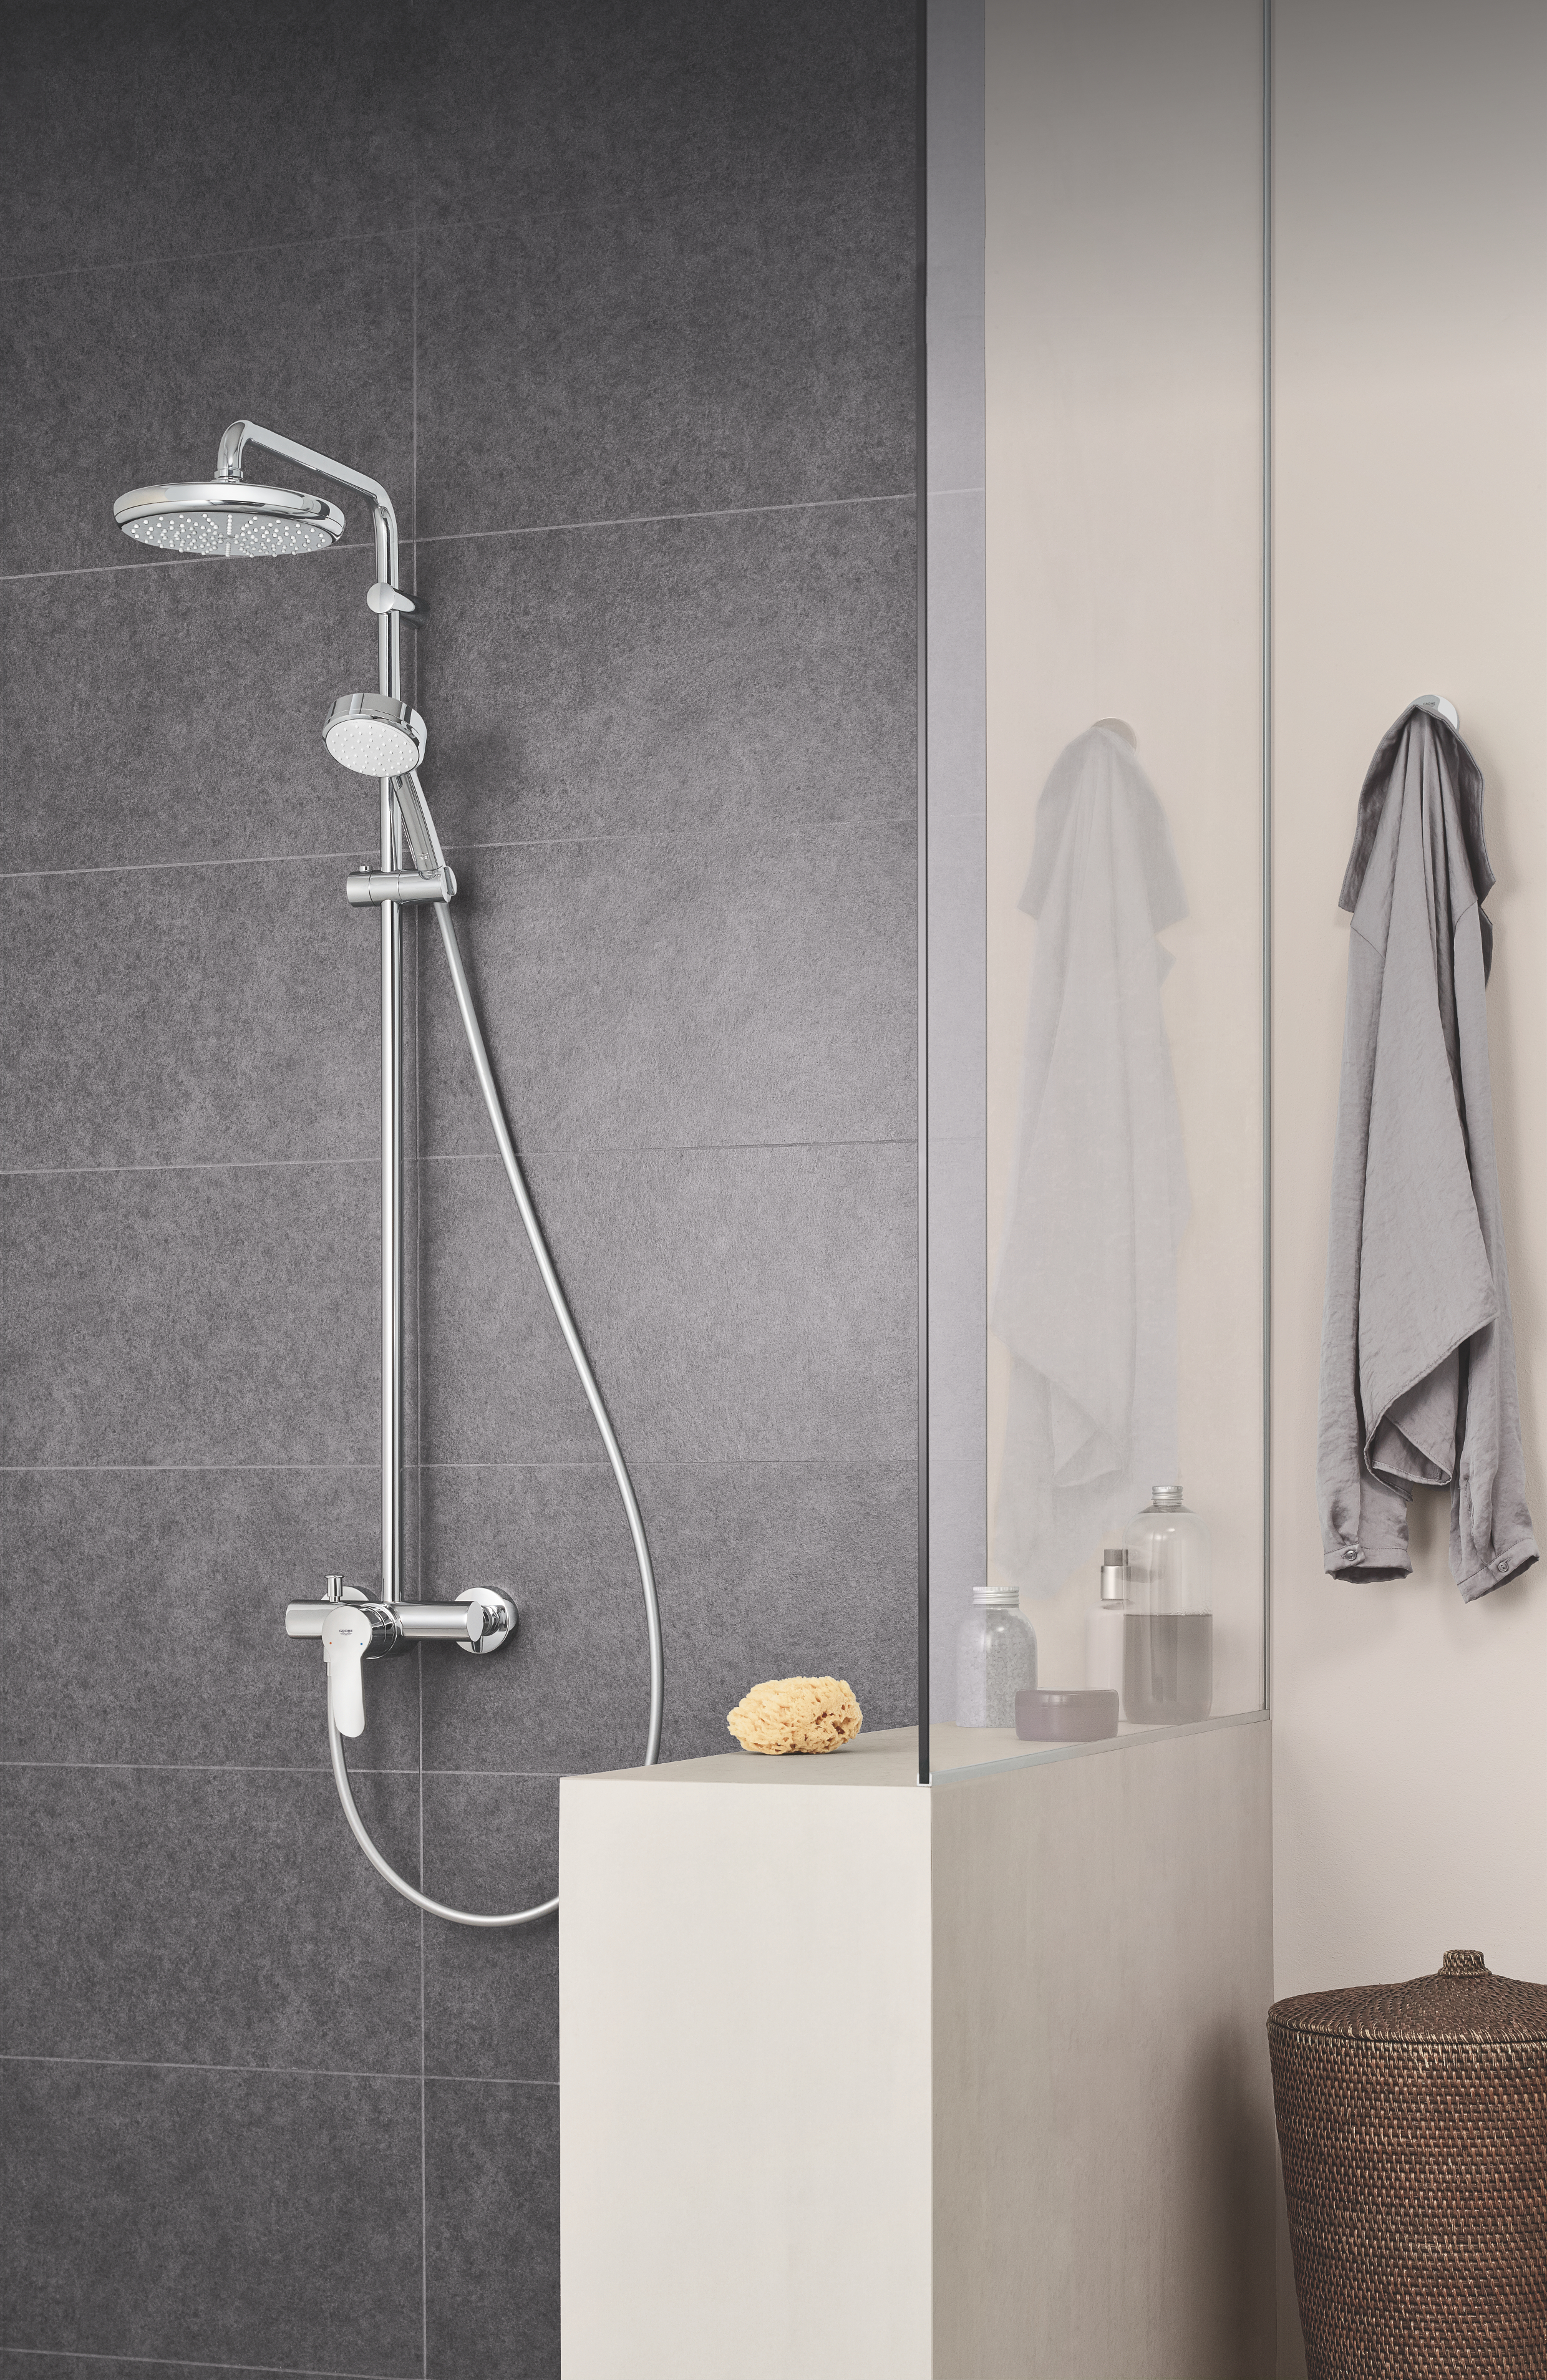 Grohe new tempesta 200. 27922001 Grohe. Душевая стойка Grohe Tempesta Cosmopolitan 27922001. Grohe Tempesta Cosmopolitan 210. Душевая стойка Grohe Tempesta Cosmopolitan 210 27922001.